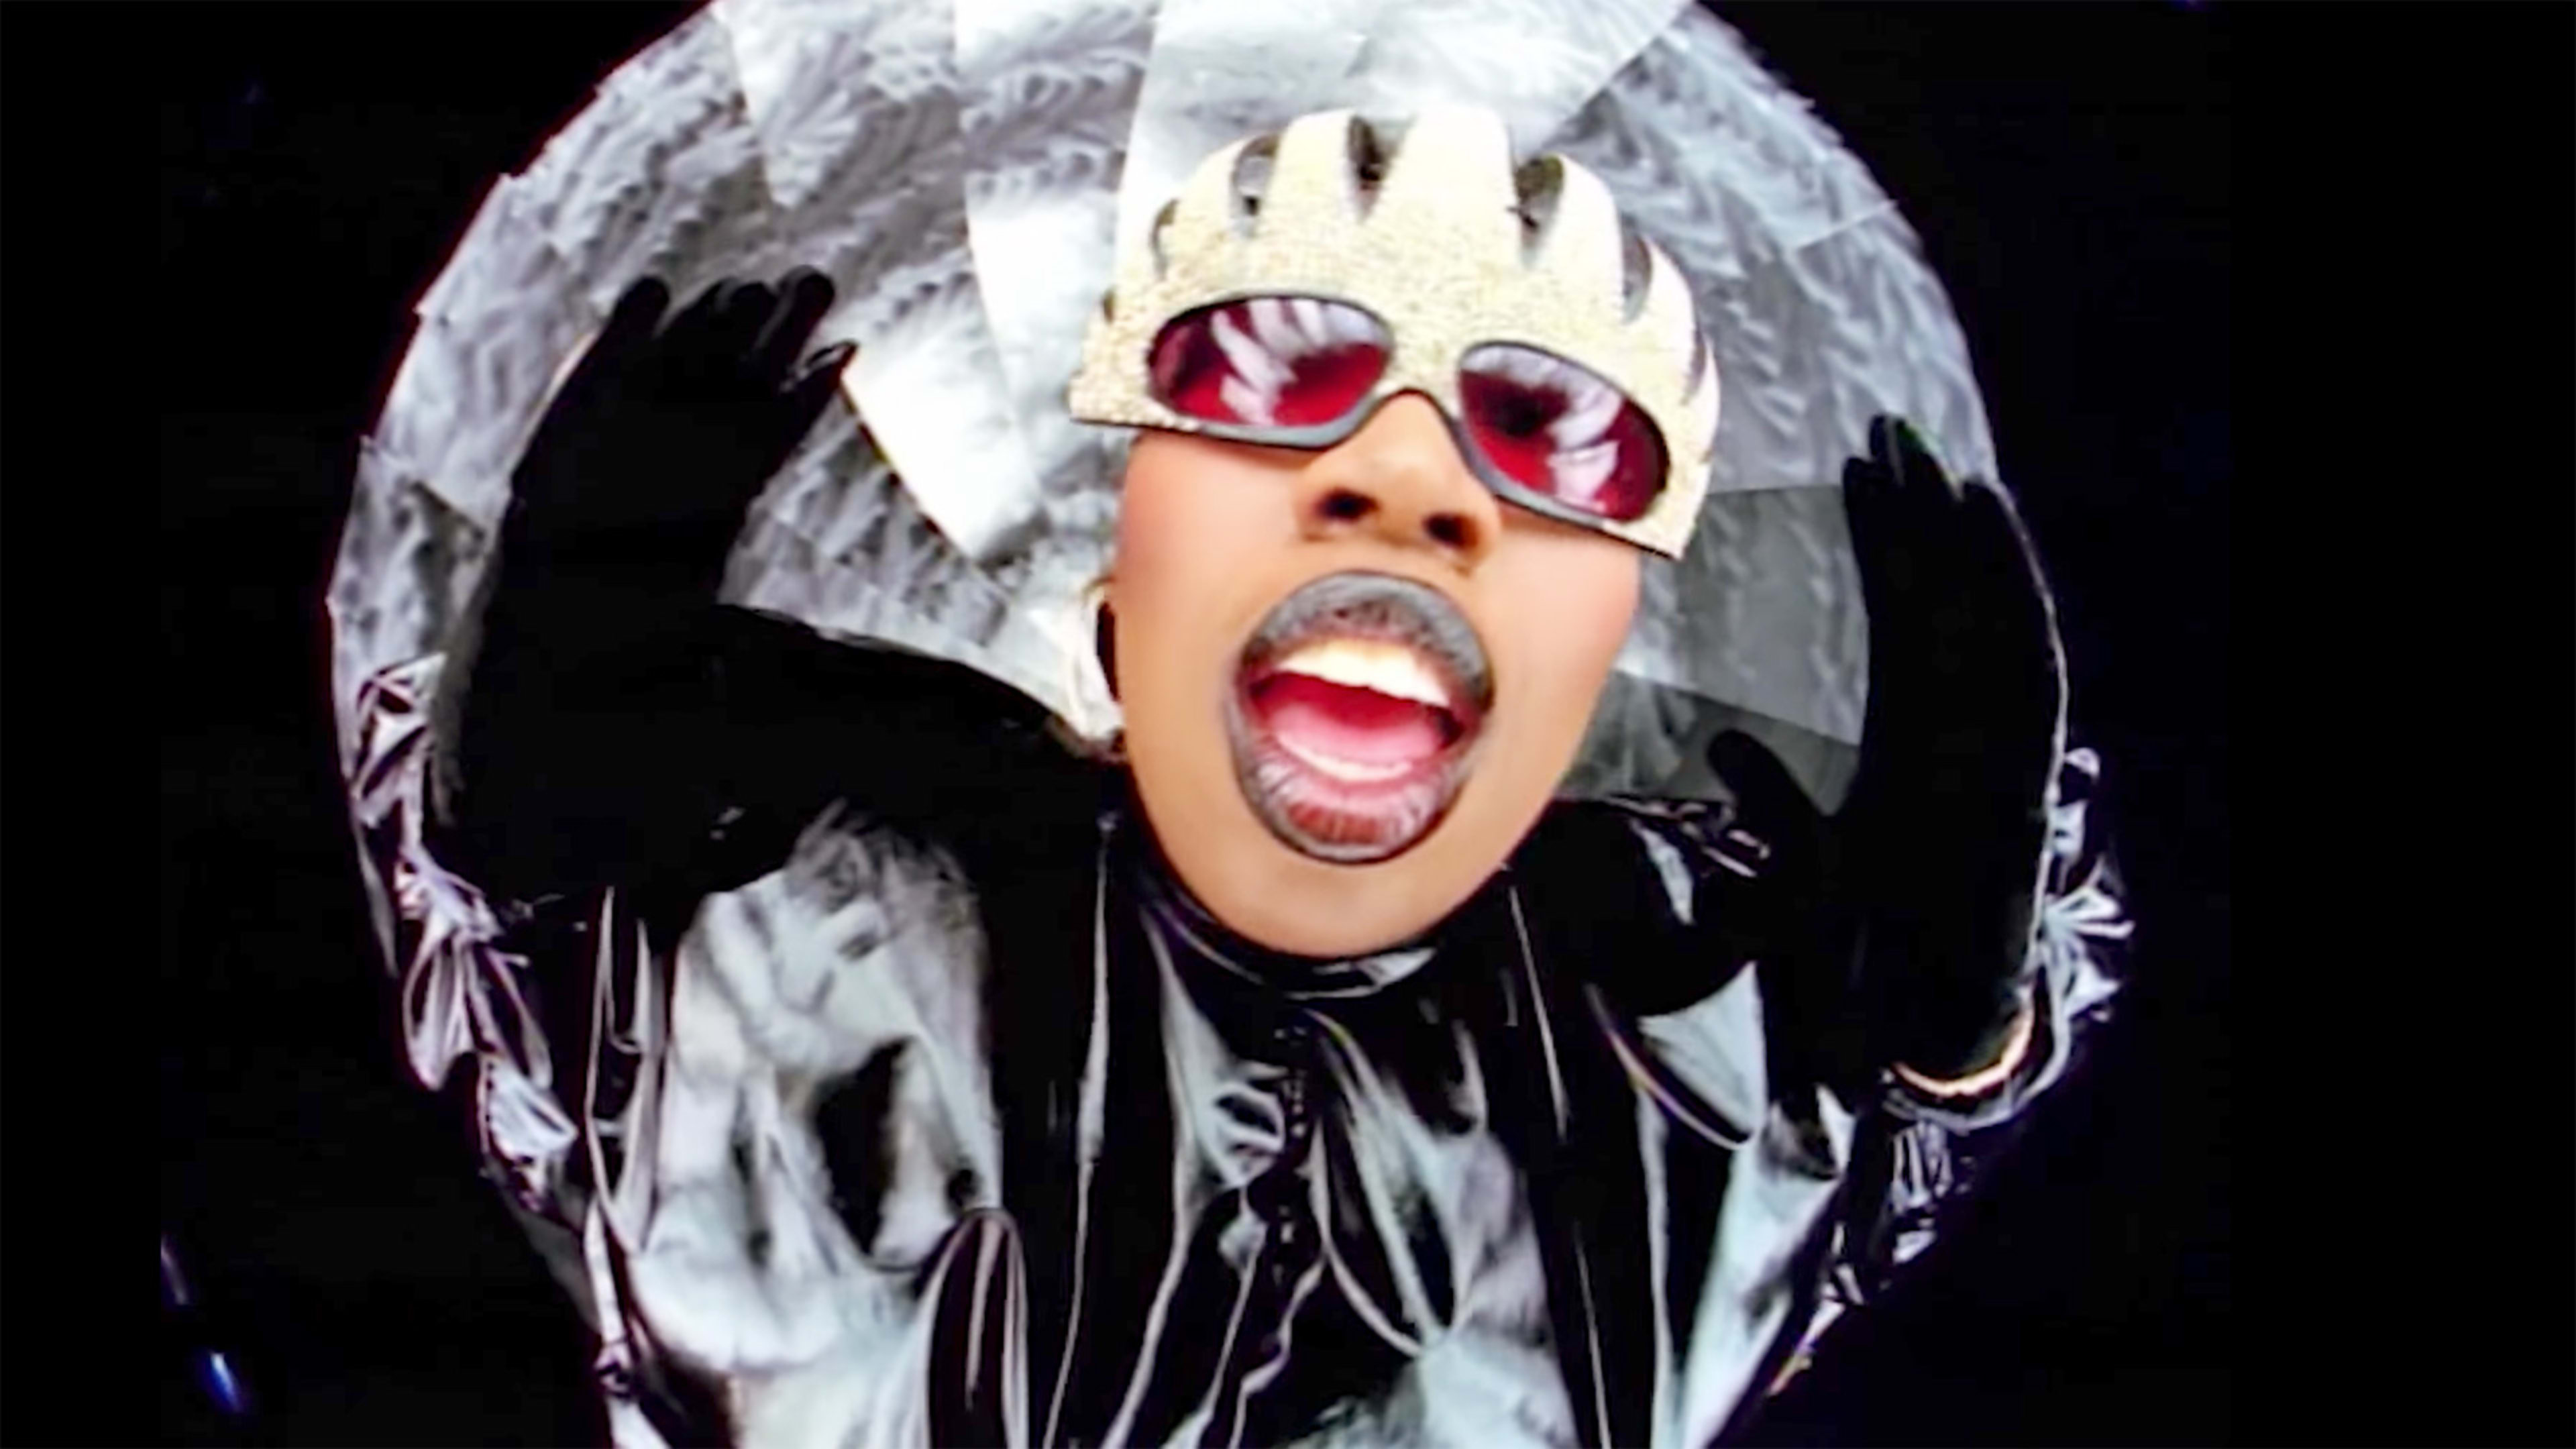 This very important petition would replace a Confederate statue with one of Missy Elliott